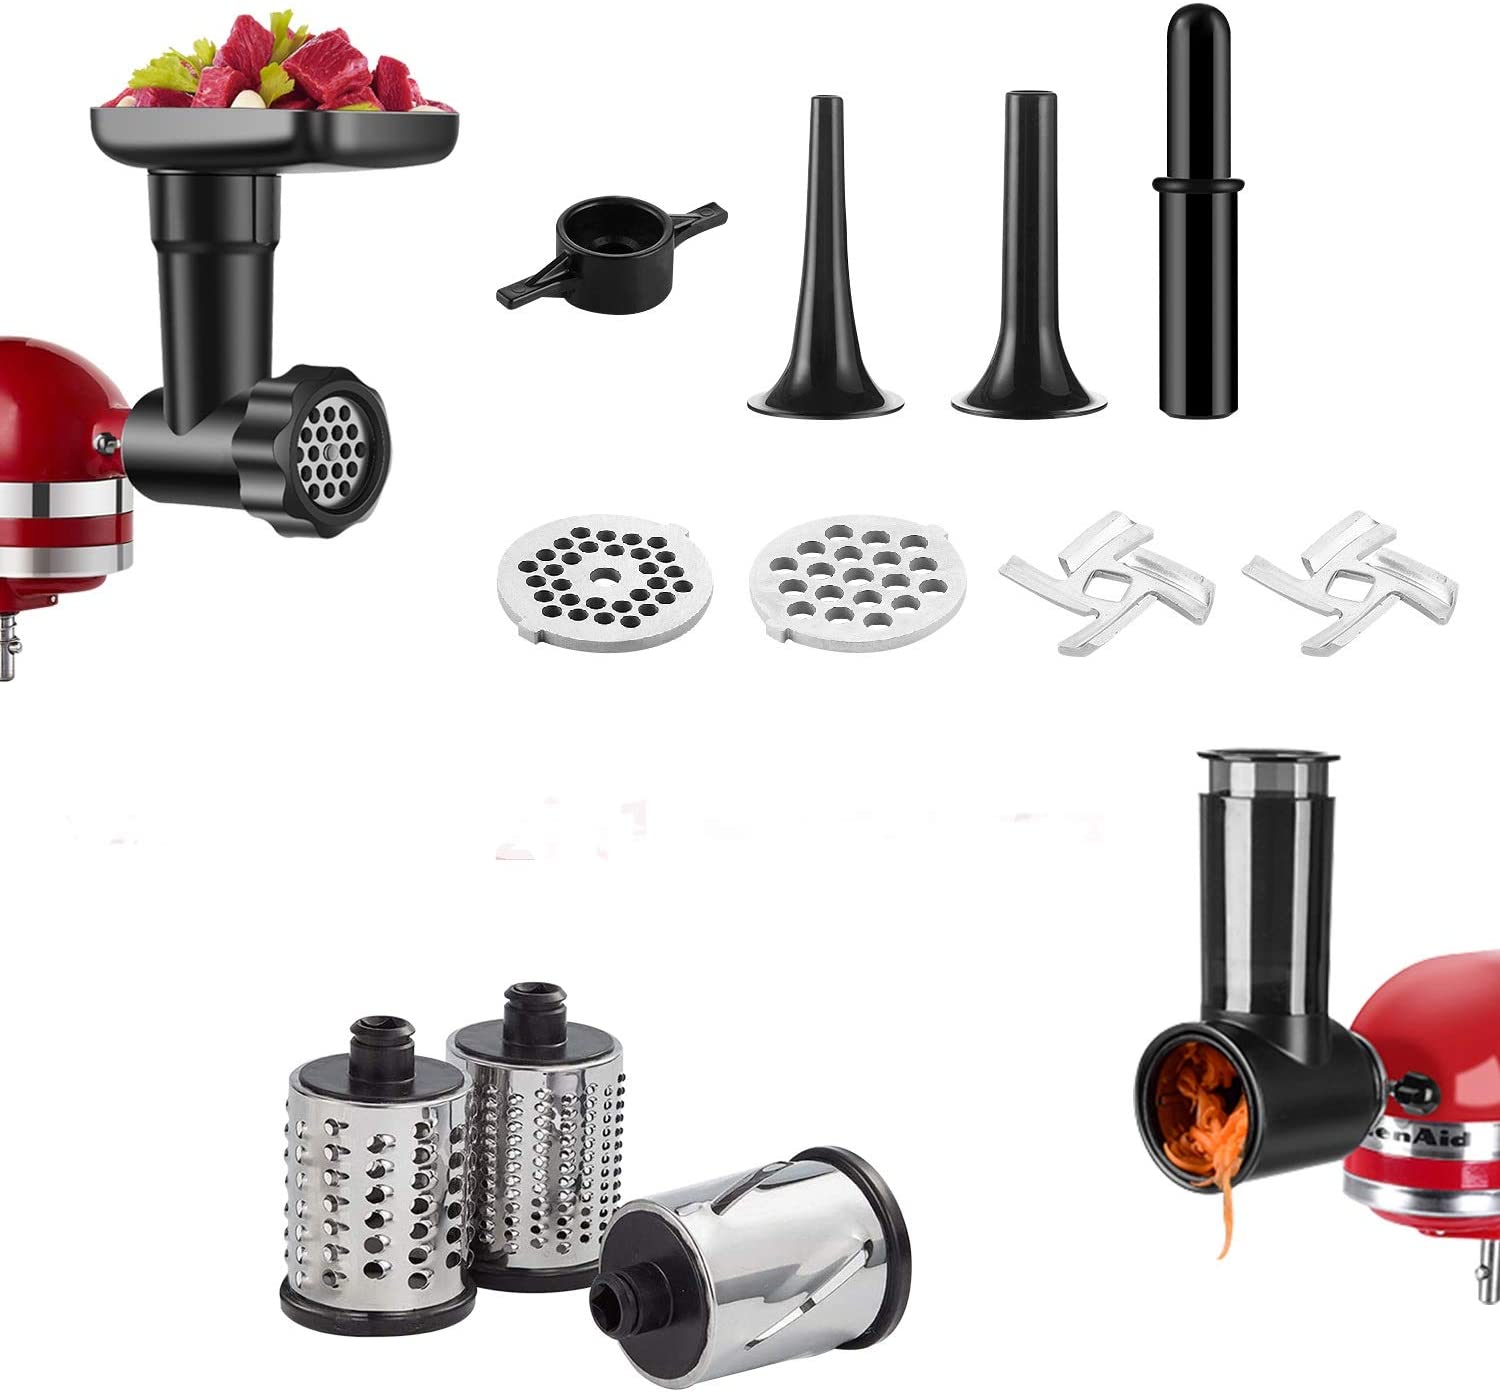 Vegetable Cutter and Mincer Replacement Parts for KitchenAid Food Processors, COFUN Meat Grinder Accessories with Grinding Disc, Sausage Filler Horns, Vegetable Cutter with Crown Grater Cutting Drum (Black)